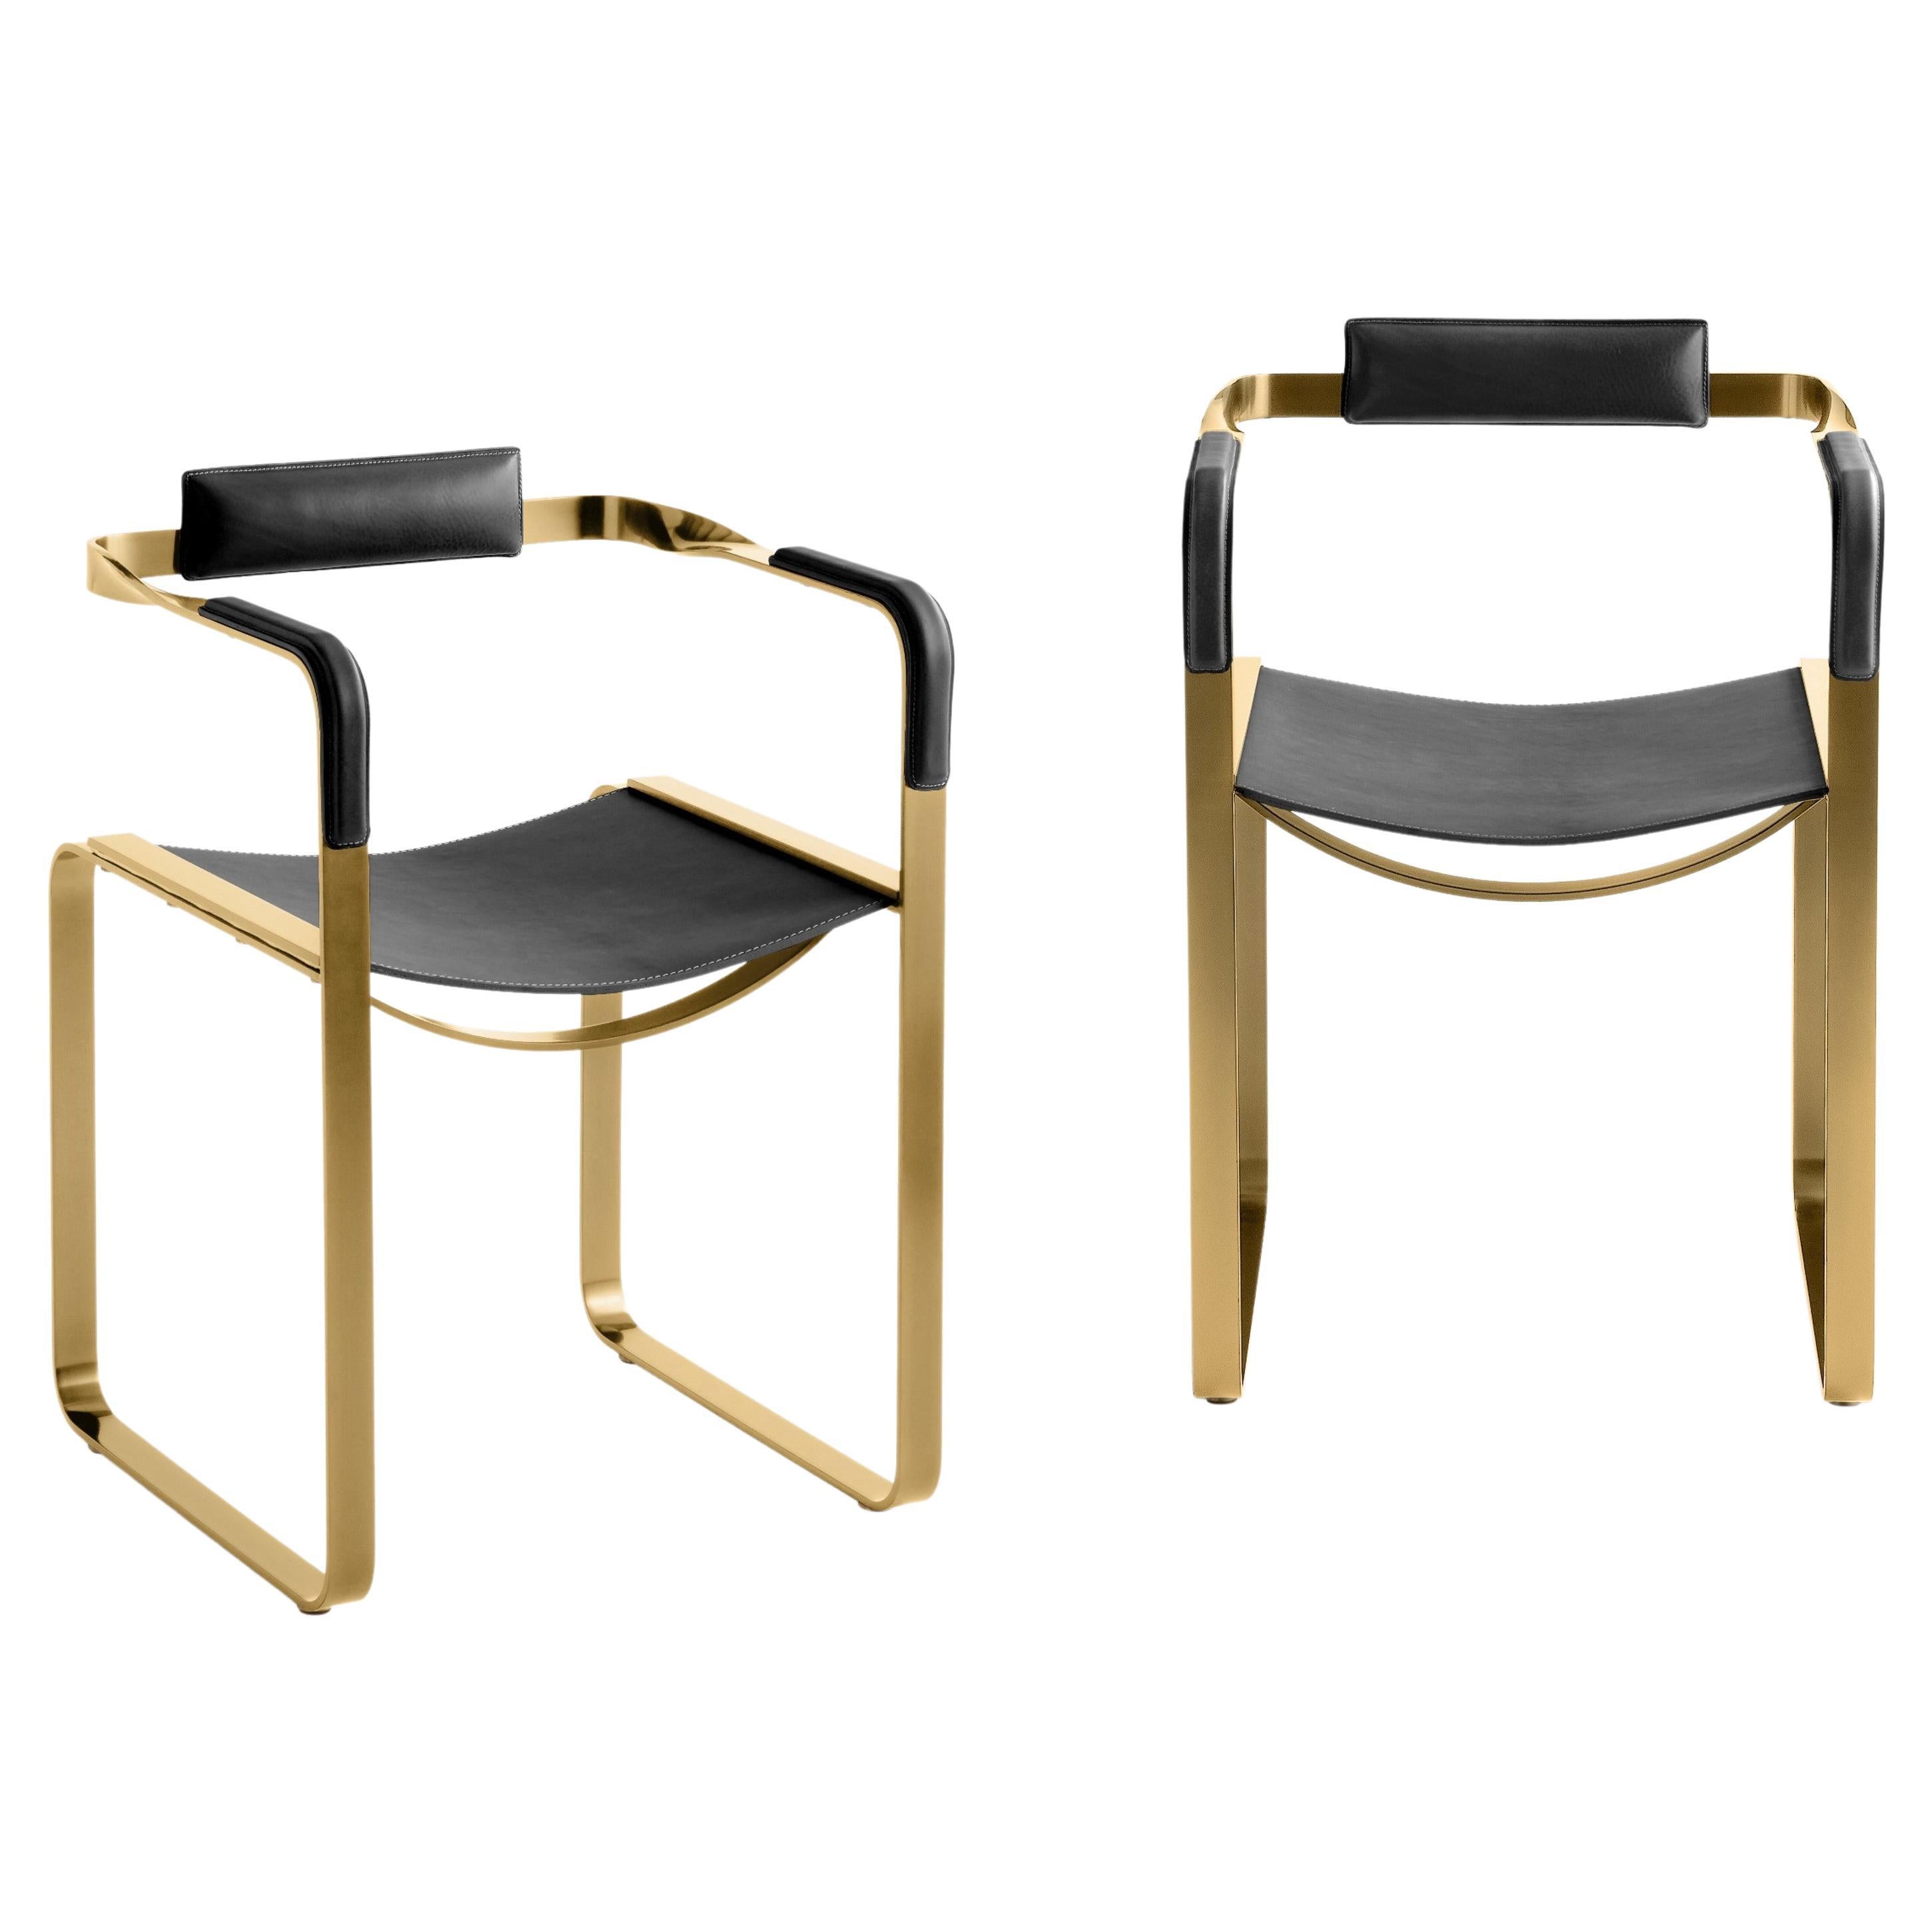 Set of 2 Armchair, Aged Brass Steel & Black Saddle Leather, Contemporary Style For Sale